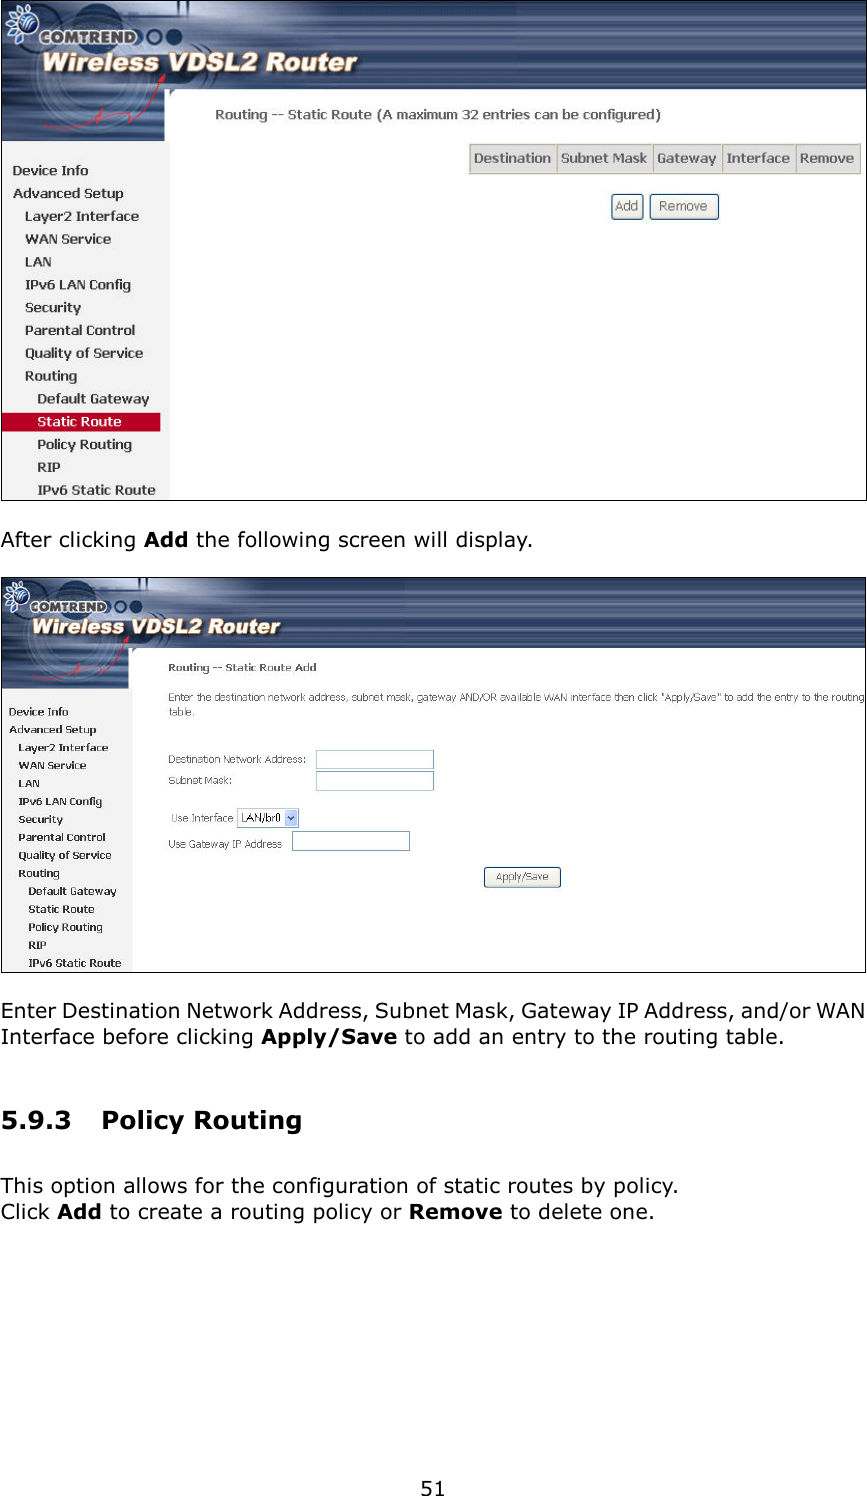   51   After clicking Add the following screen will display.      Enter Destination Network Address, Subnet Mask, Gateway IP Address, and/or WAN Interface before clicking Apply/Save to add an entry to the routing table. 5.9.3  Policy Routing This option allows for the configuration of static routes by policy.   Click Add to create a routing policy or Remove to delete one.  